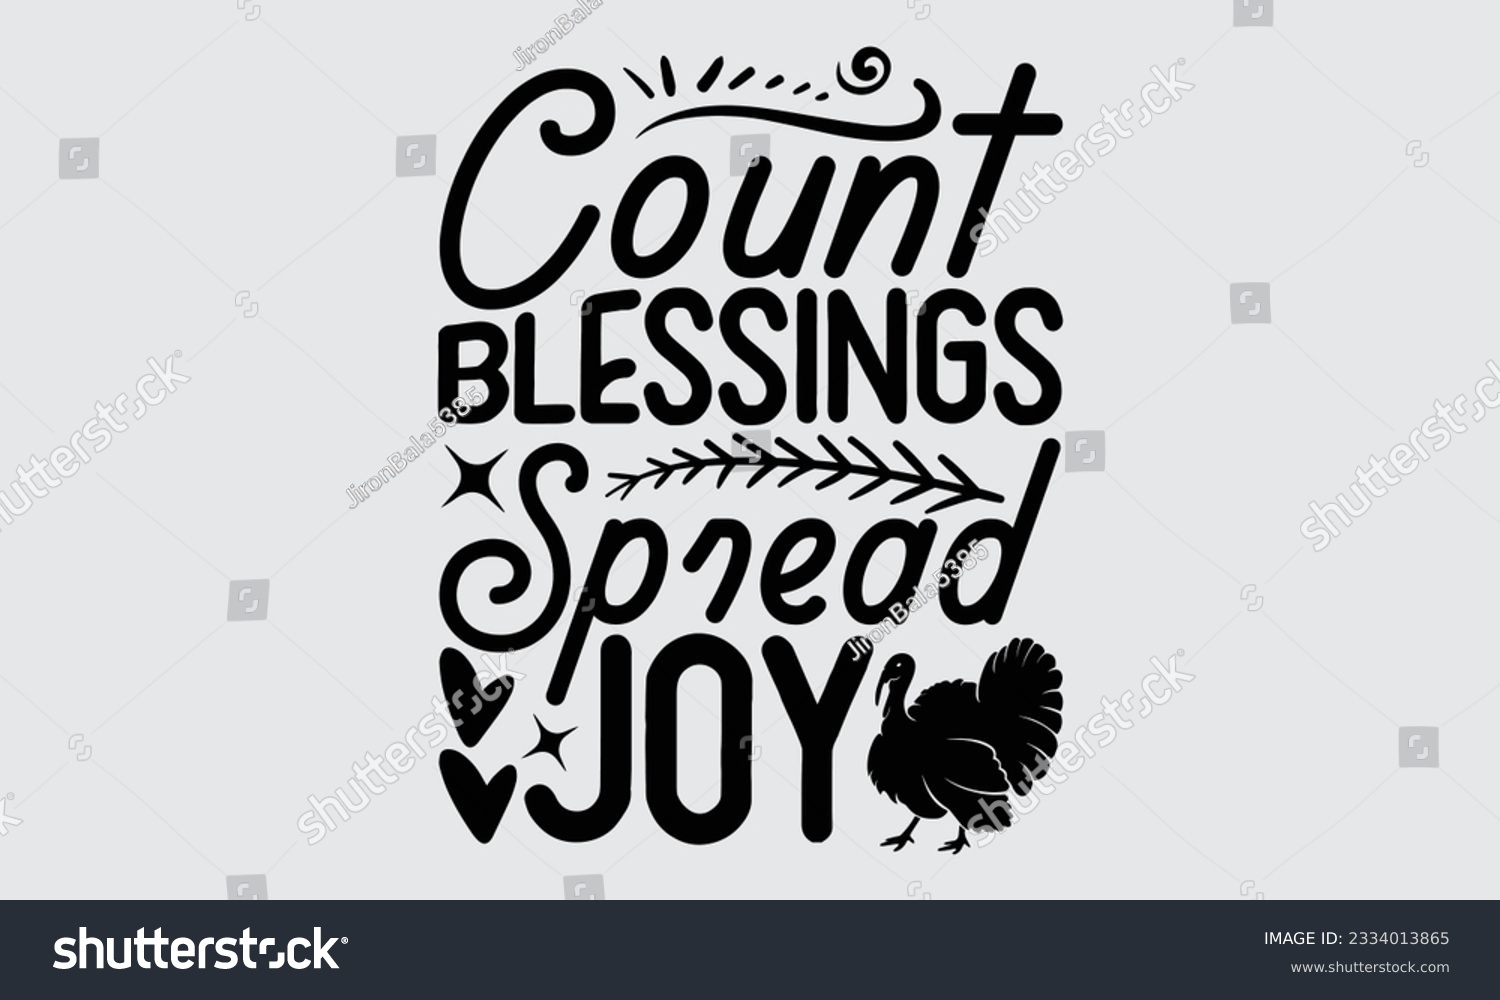 SVG of Count Blessings Spread Joy - Thanksgiving svg typography t-shirt design, this illustration can be used as a print on Stickers, Templates, and bags, stationary or as a poster.
 svg